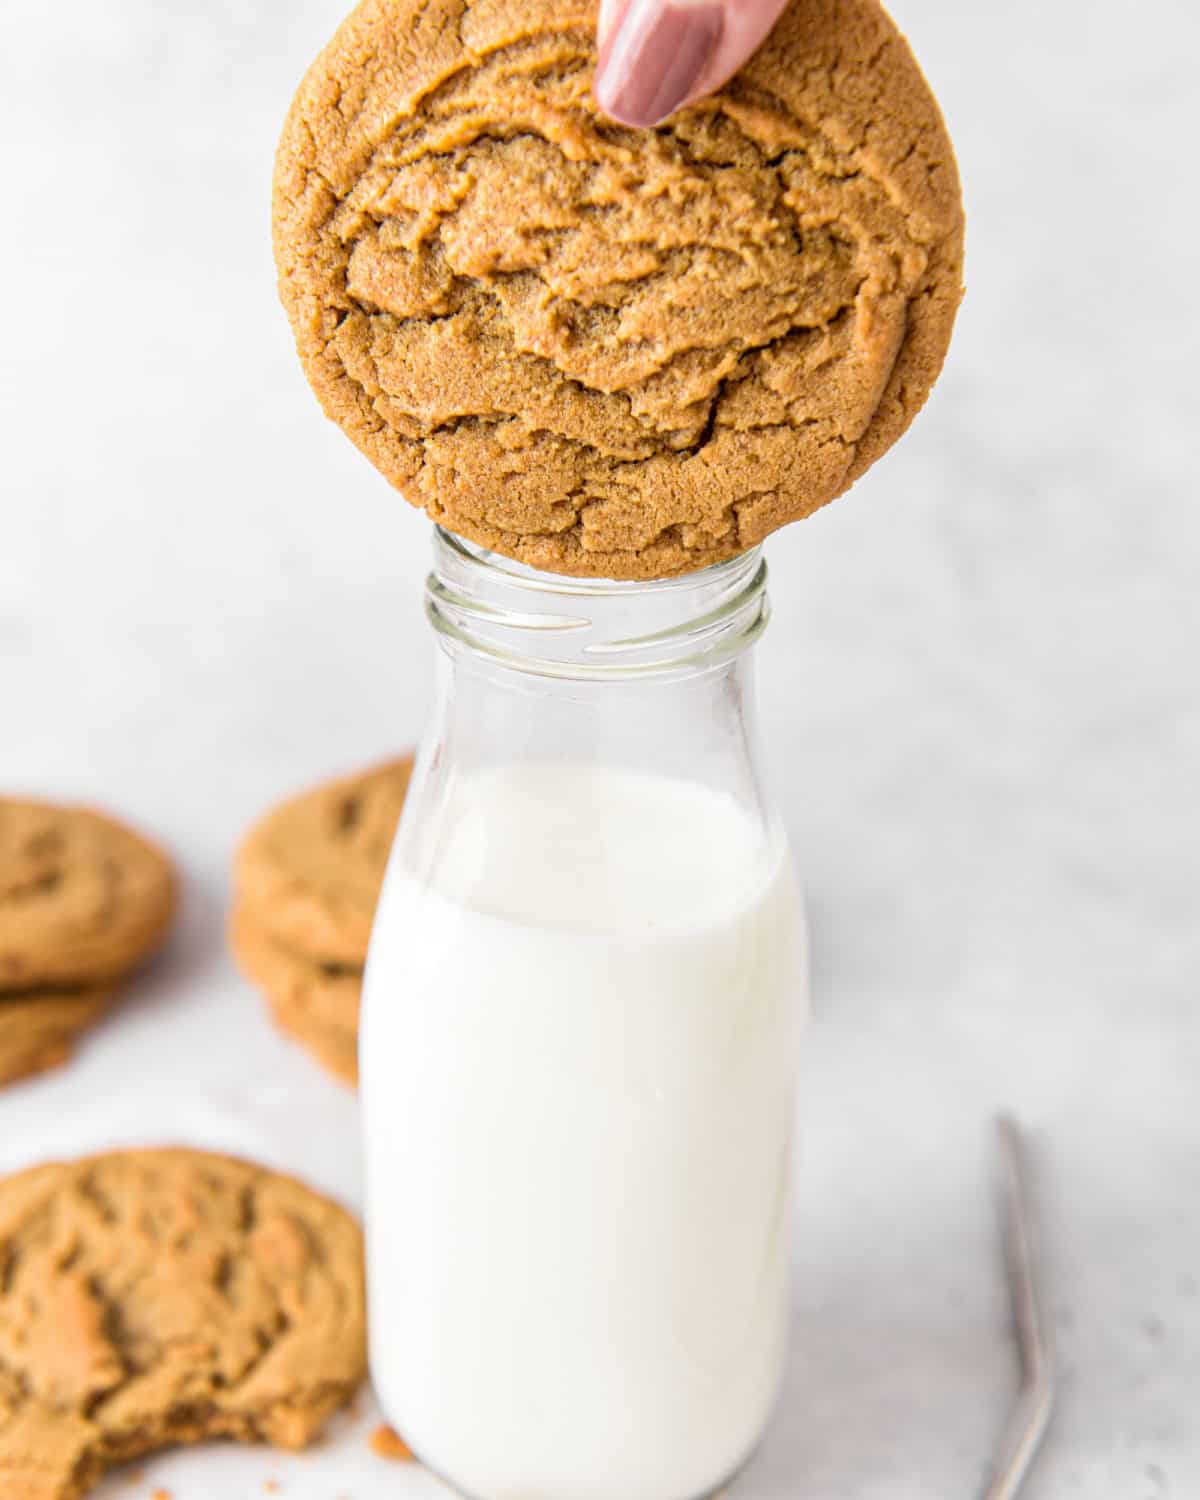 A person's hand dunking a cookie in milk.